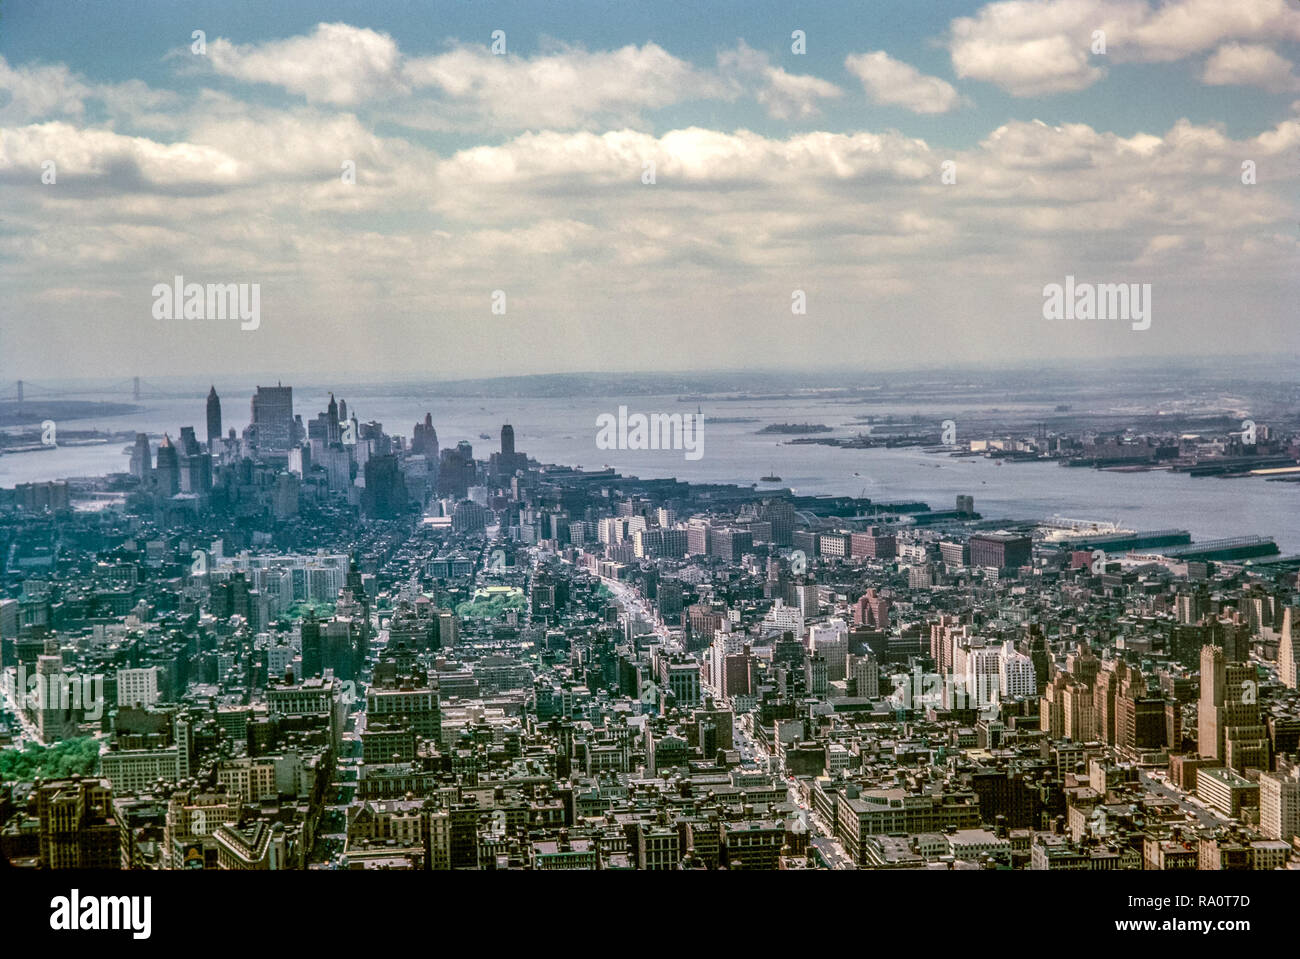 June 1964. View from the top of the Empire State Building looking towards  Lower Manhattan and the Statue Of Liberty in the far distance. Stock Photo